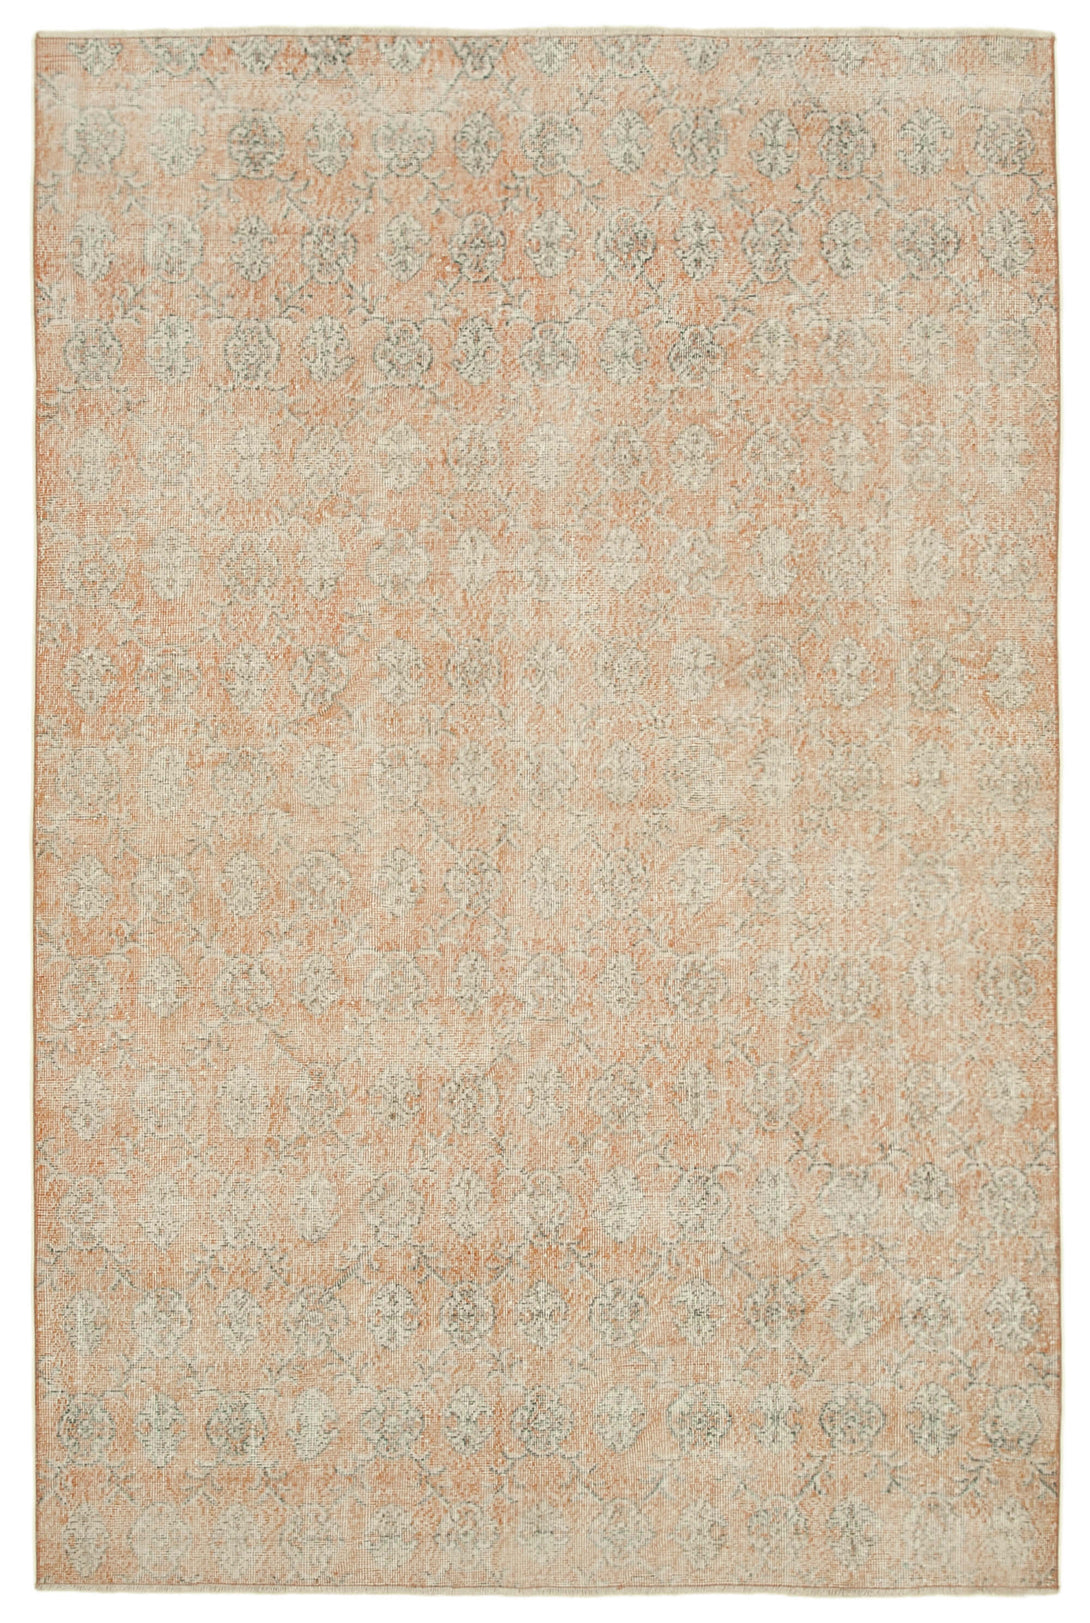 Handmade White Wash Area Rug > Design# OL-AC-38754 > Size: 6'-9" x 10'-4", Carpet Culture Rugs, Handmade Rugs, NYC Rugs, New Rugs, Shop Rugs, Rug Store, Outlet Rugs, SoHo Rugs, Rugs in USA